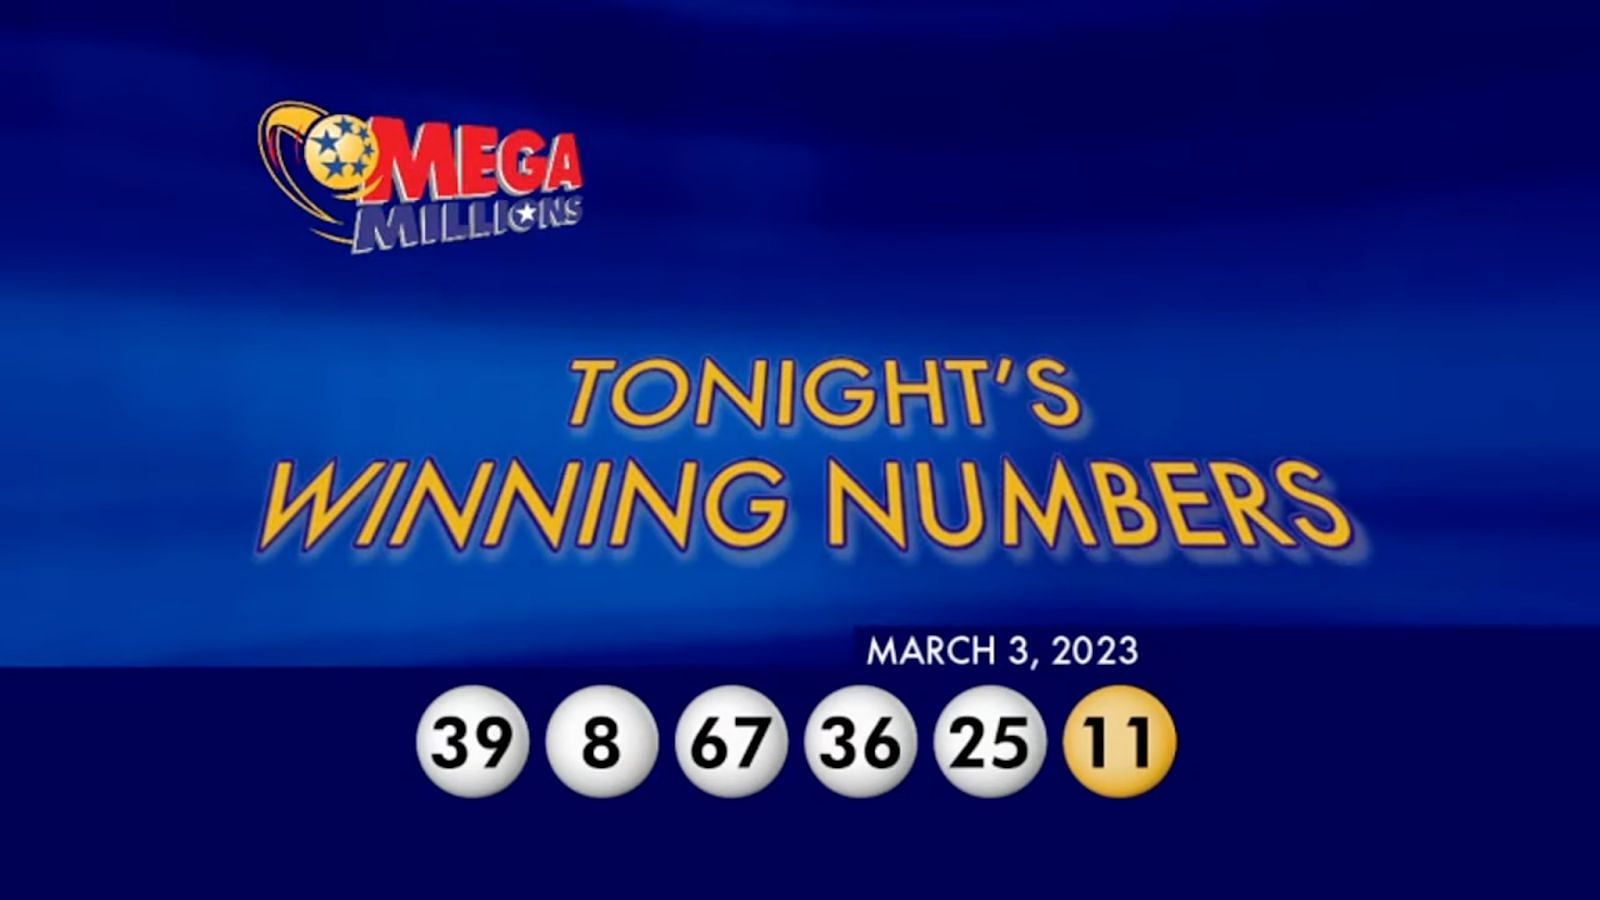 When is the next Mega Millions drawing?